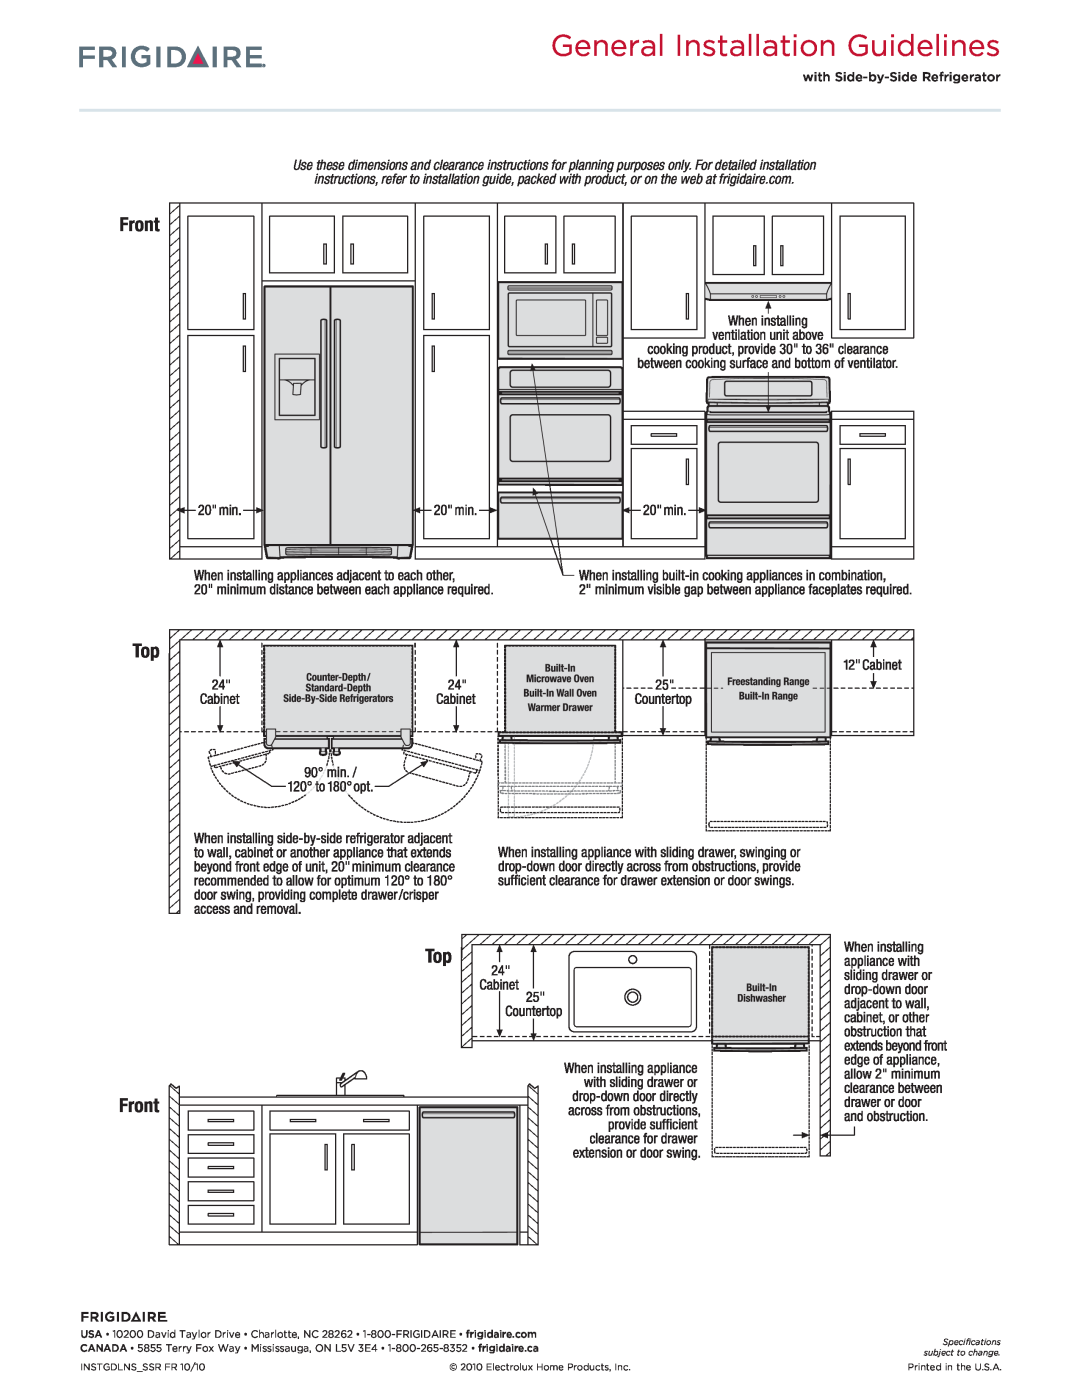 Frigidaire FFGF3051L S dimensions General Installation Guidelines, Top Front 